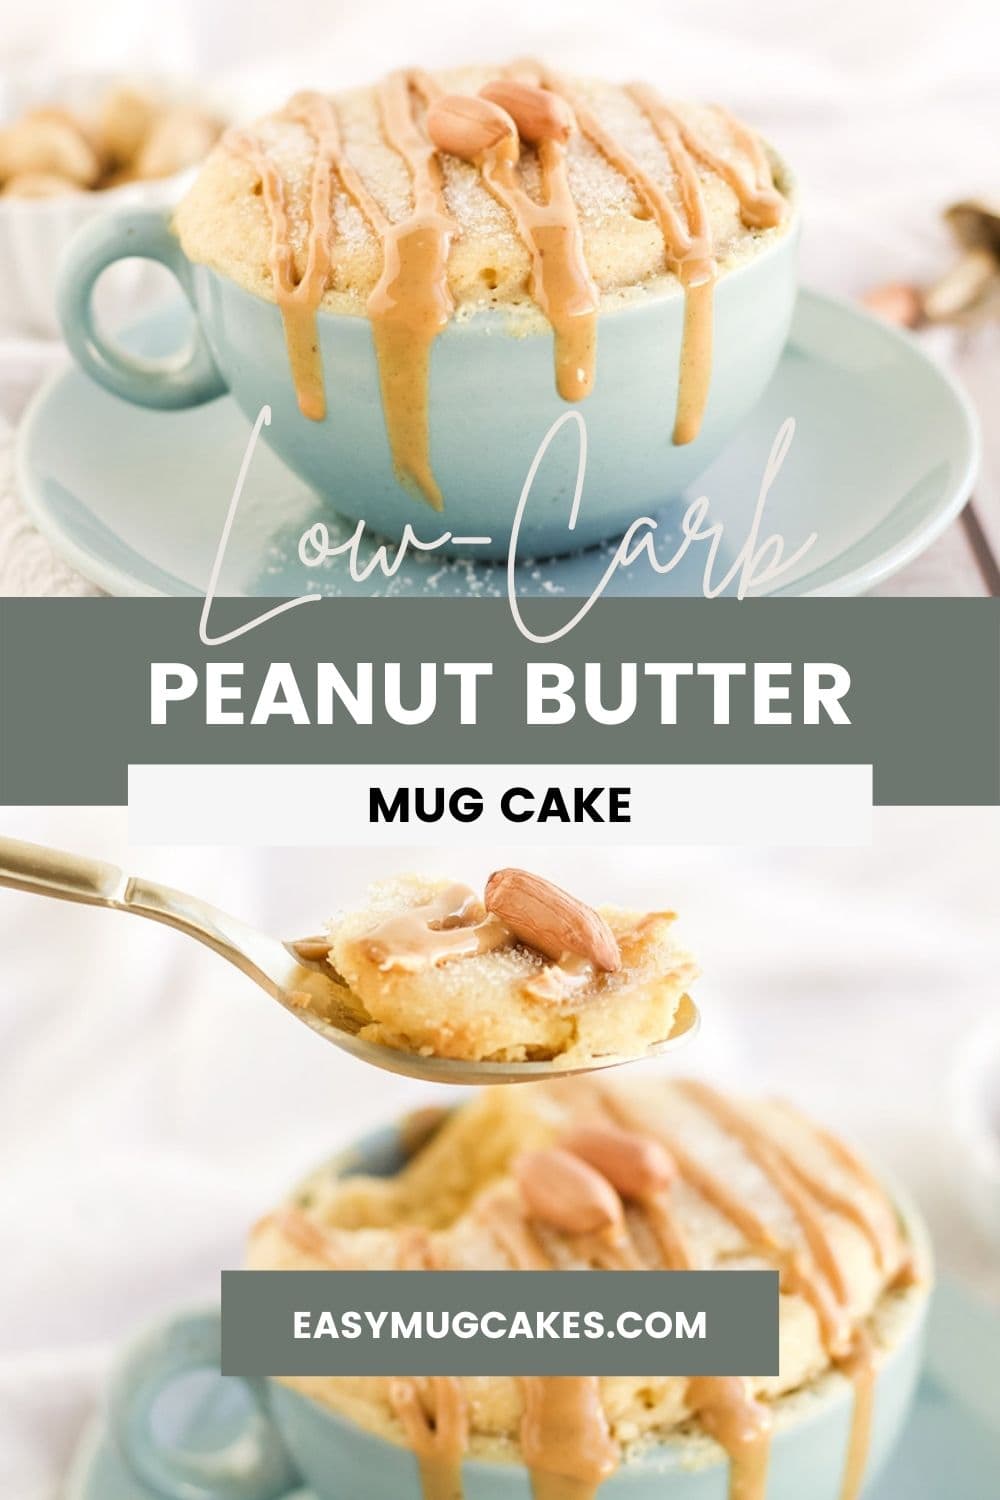 Peanut butter cake in a light blue mug and a spoonful of the cake.